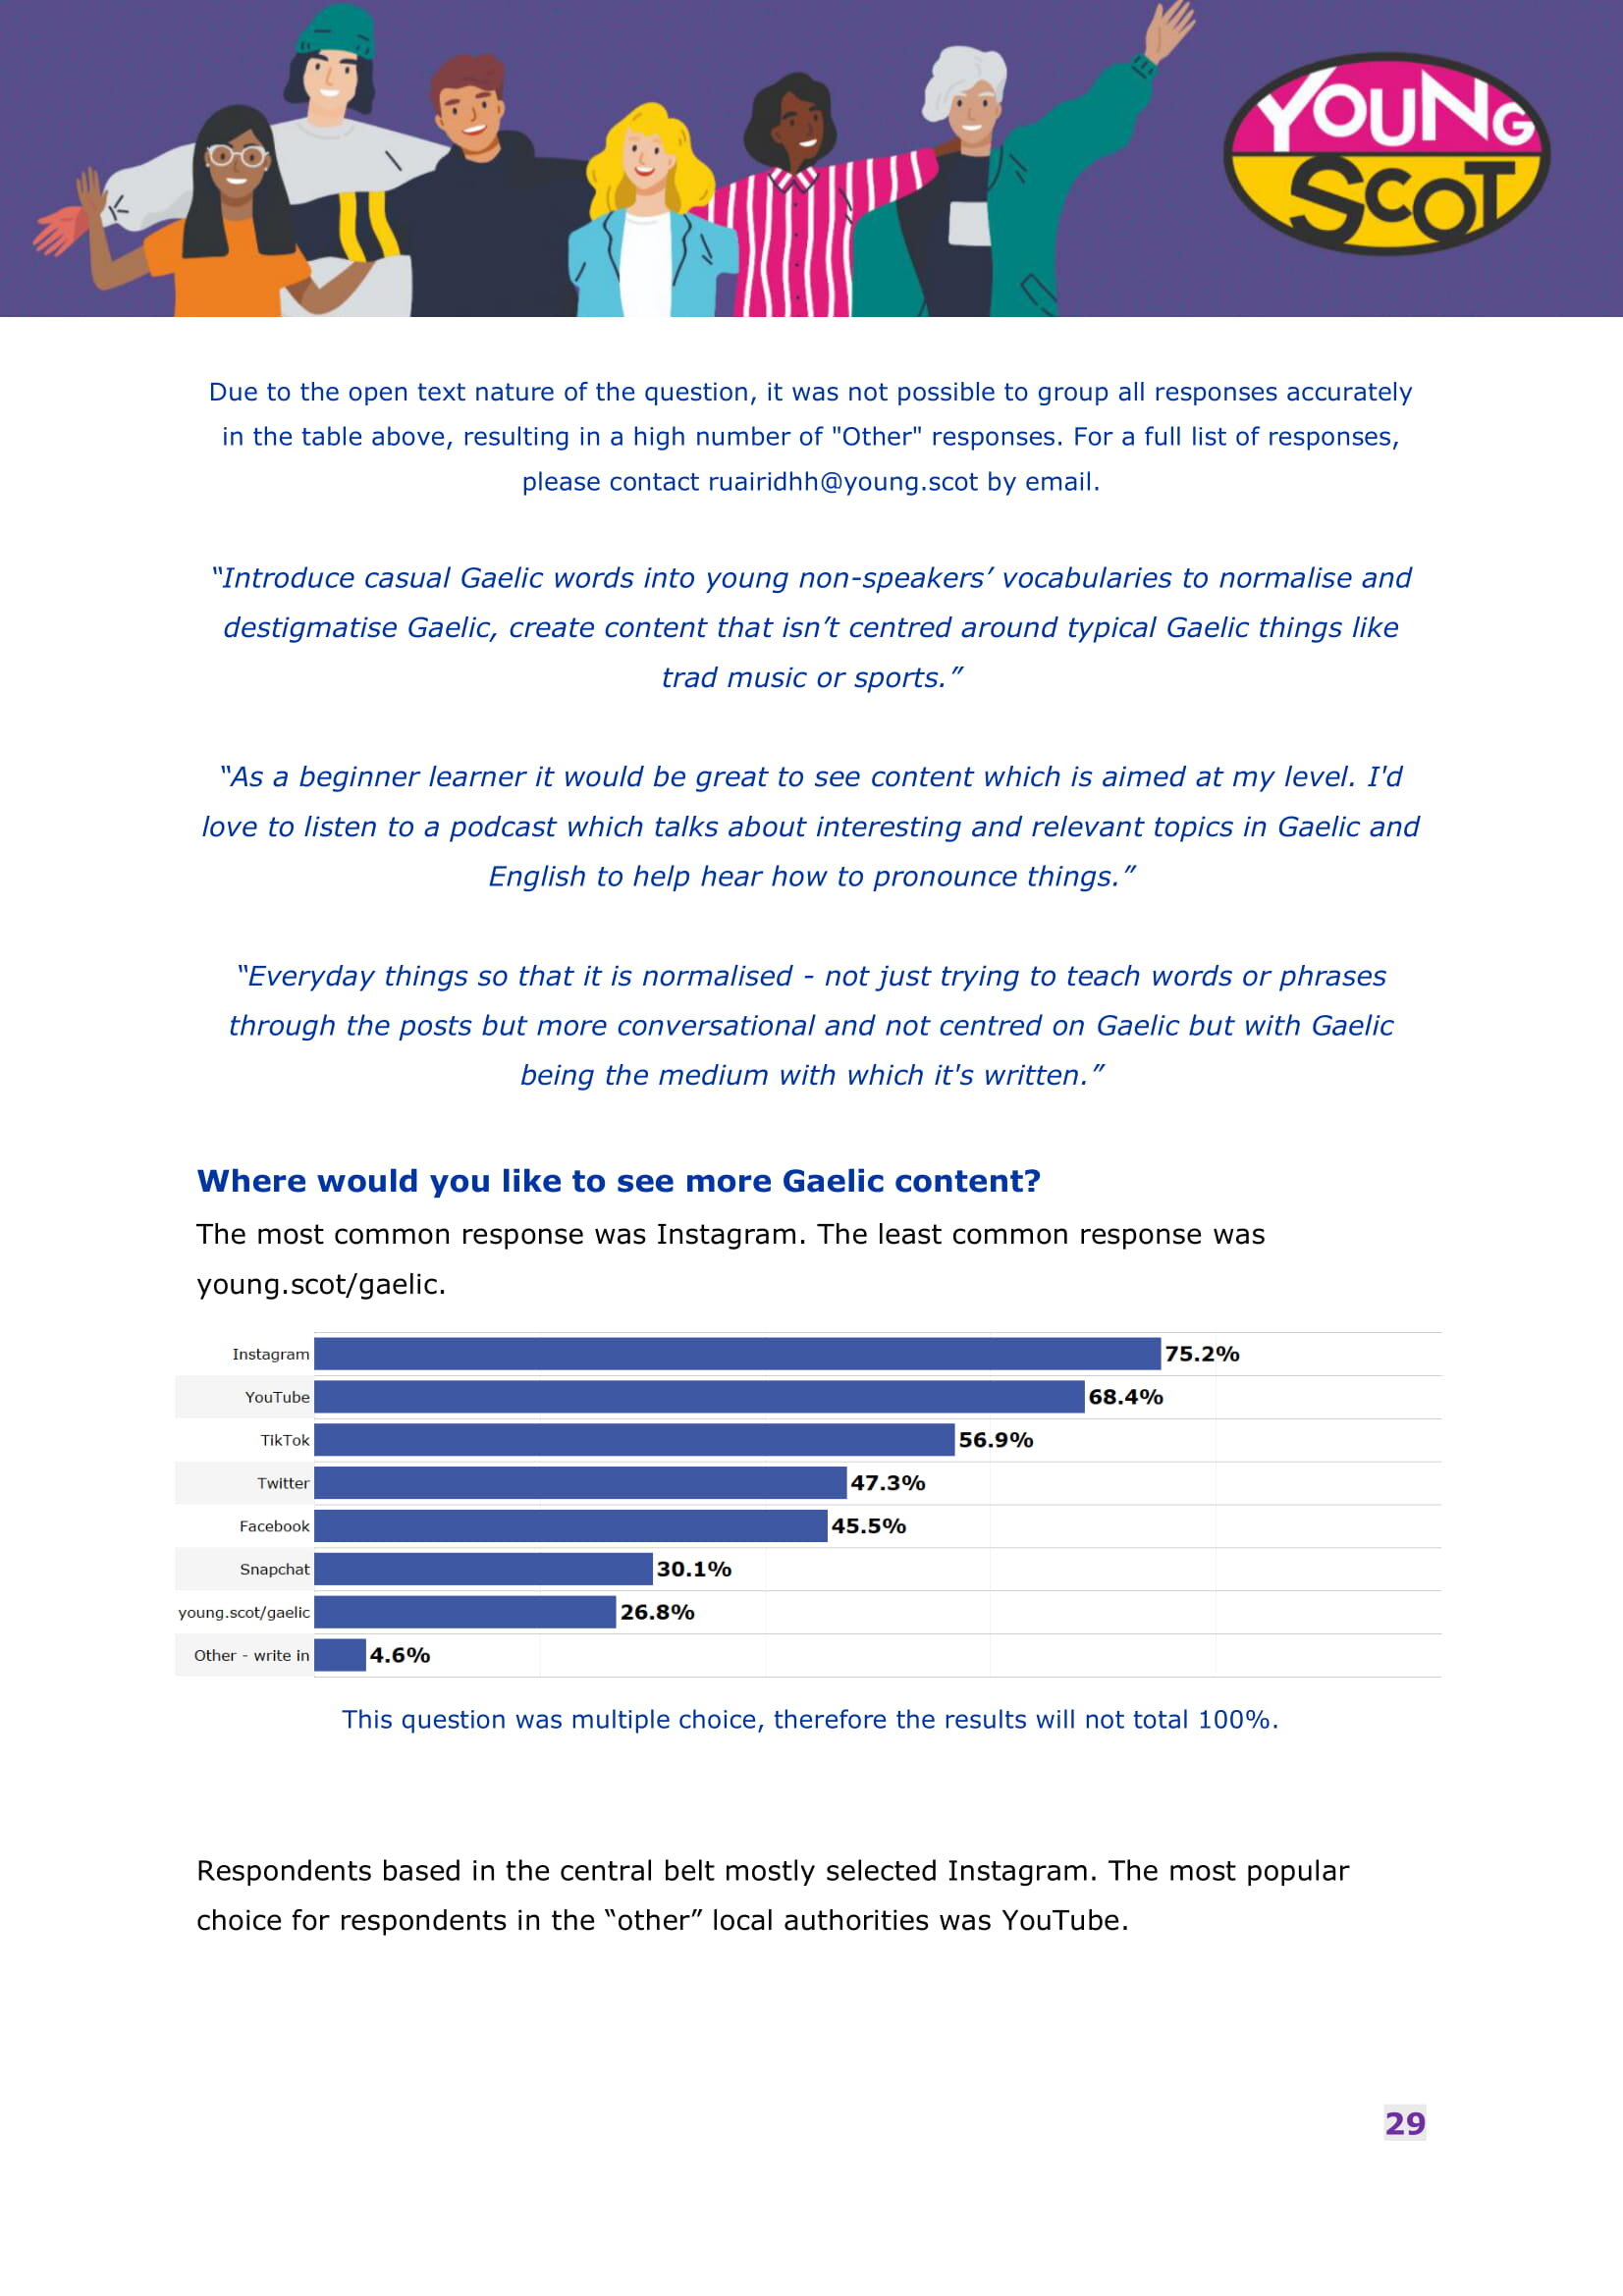 Engaging with Gaelic Online - Survey Results Report-30.jpg